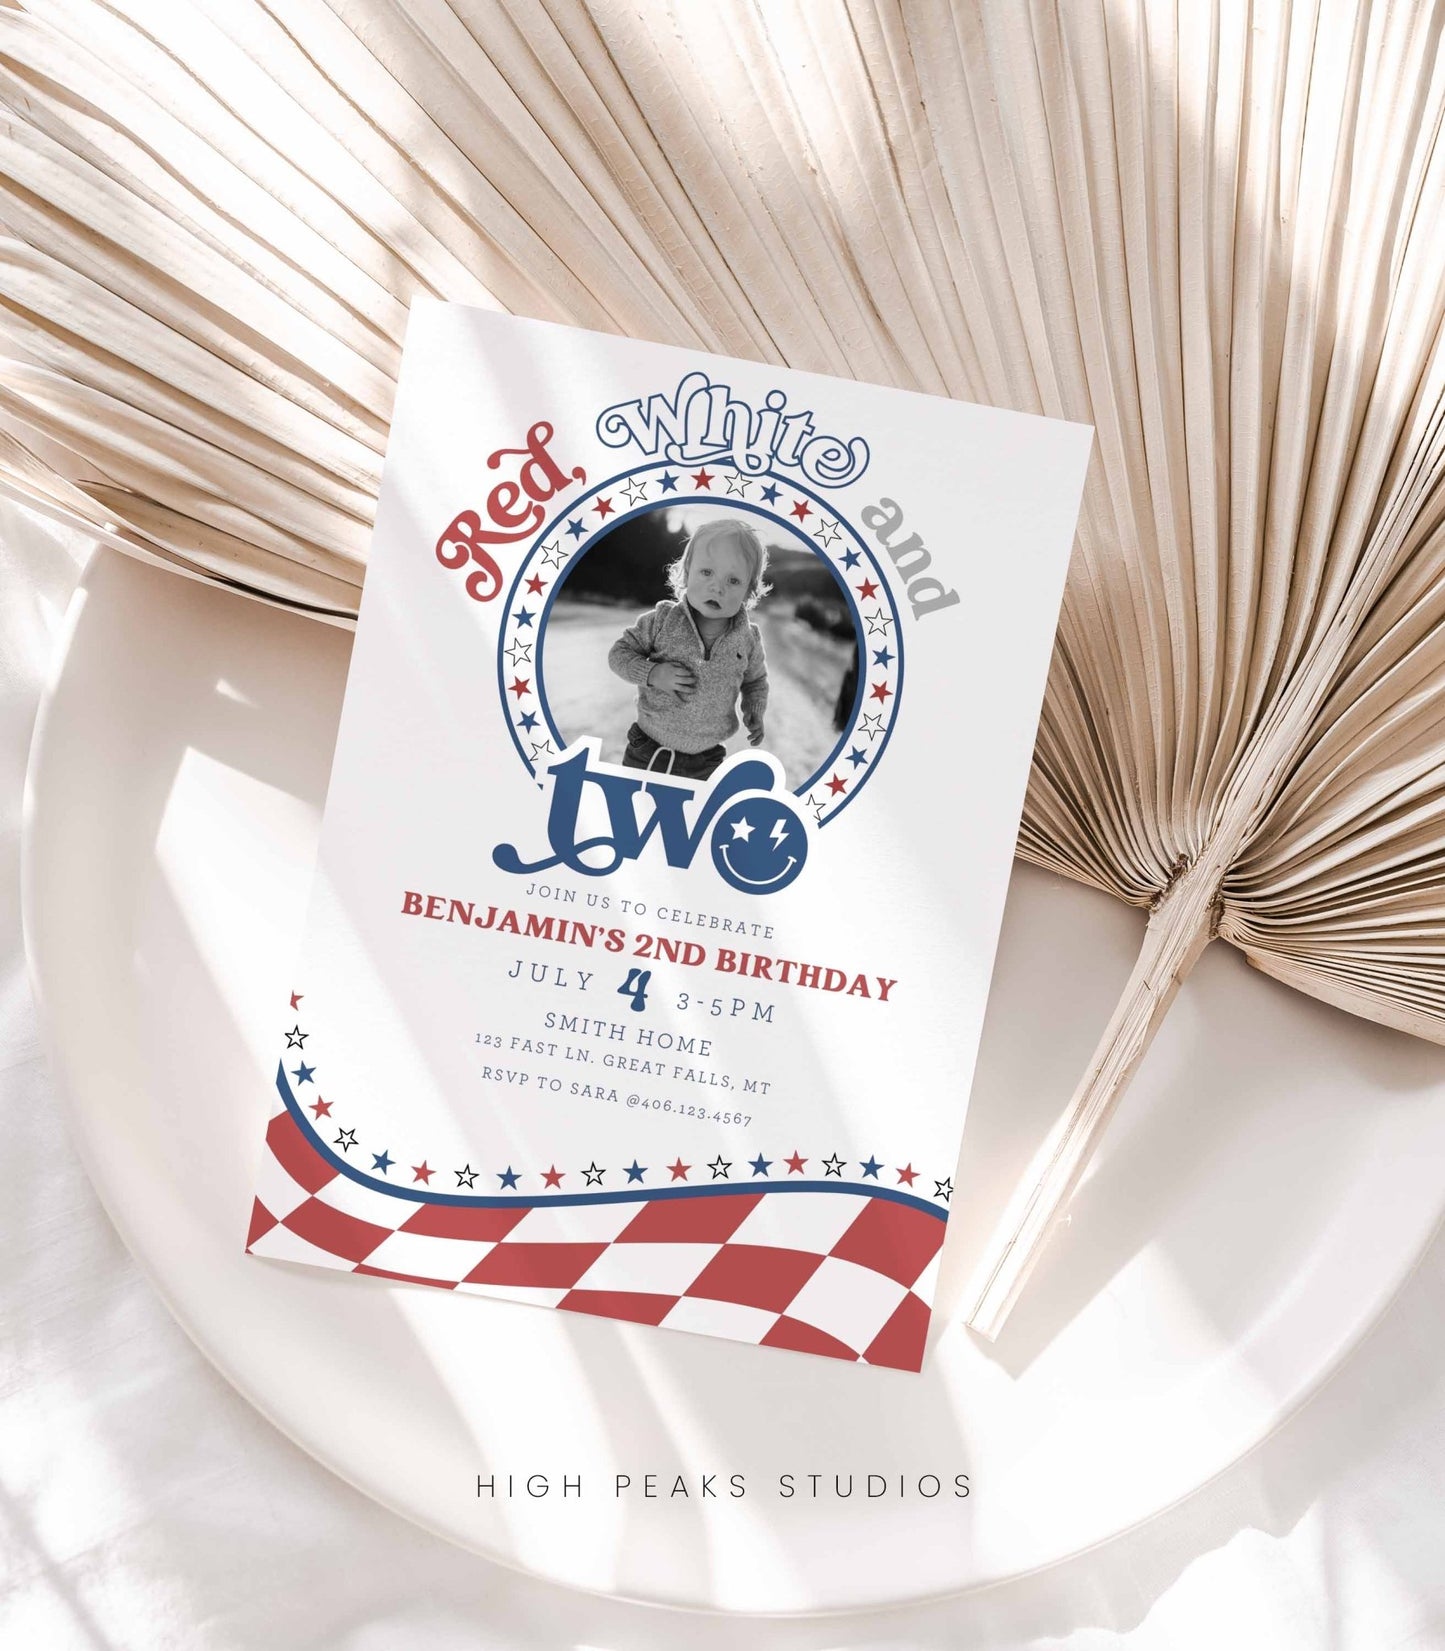 Red, White and TWO Photo Birthday Invitation - High Peaks Studios